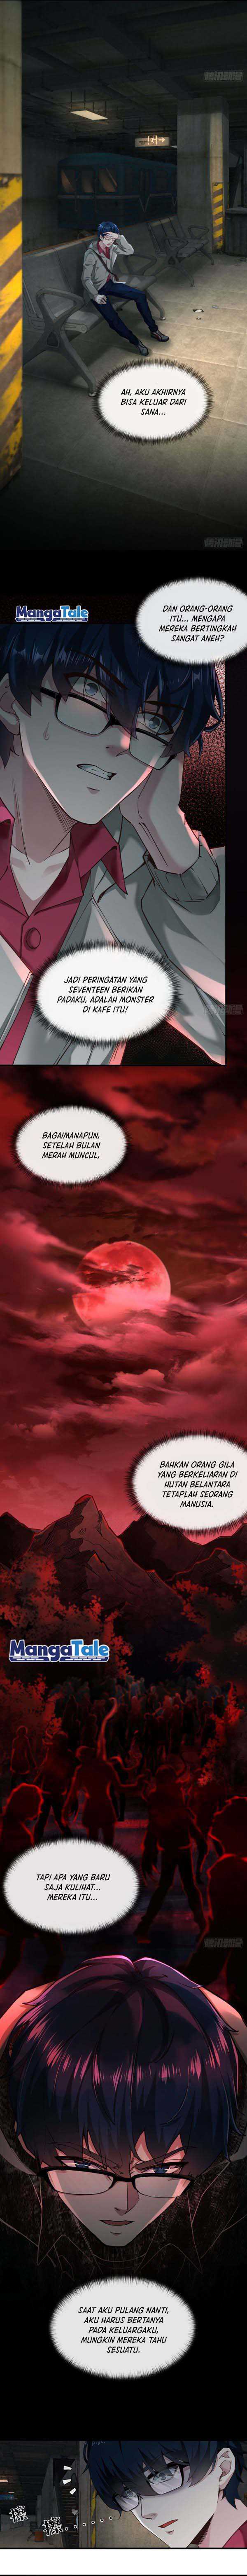 Since The Red Moon Appeared Chapter 3